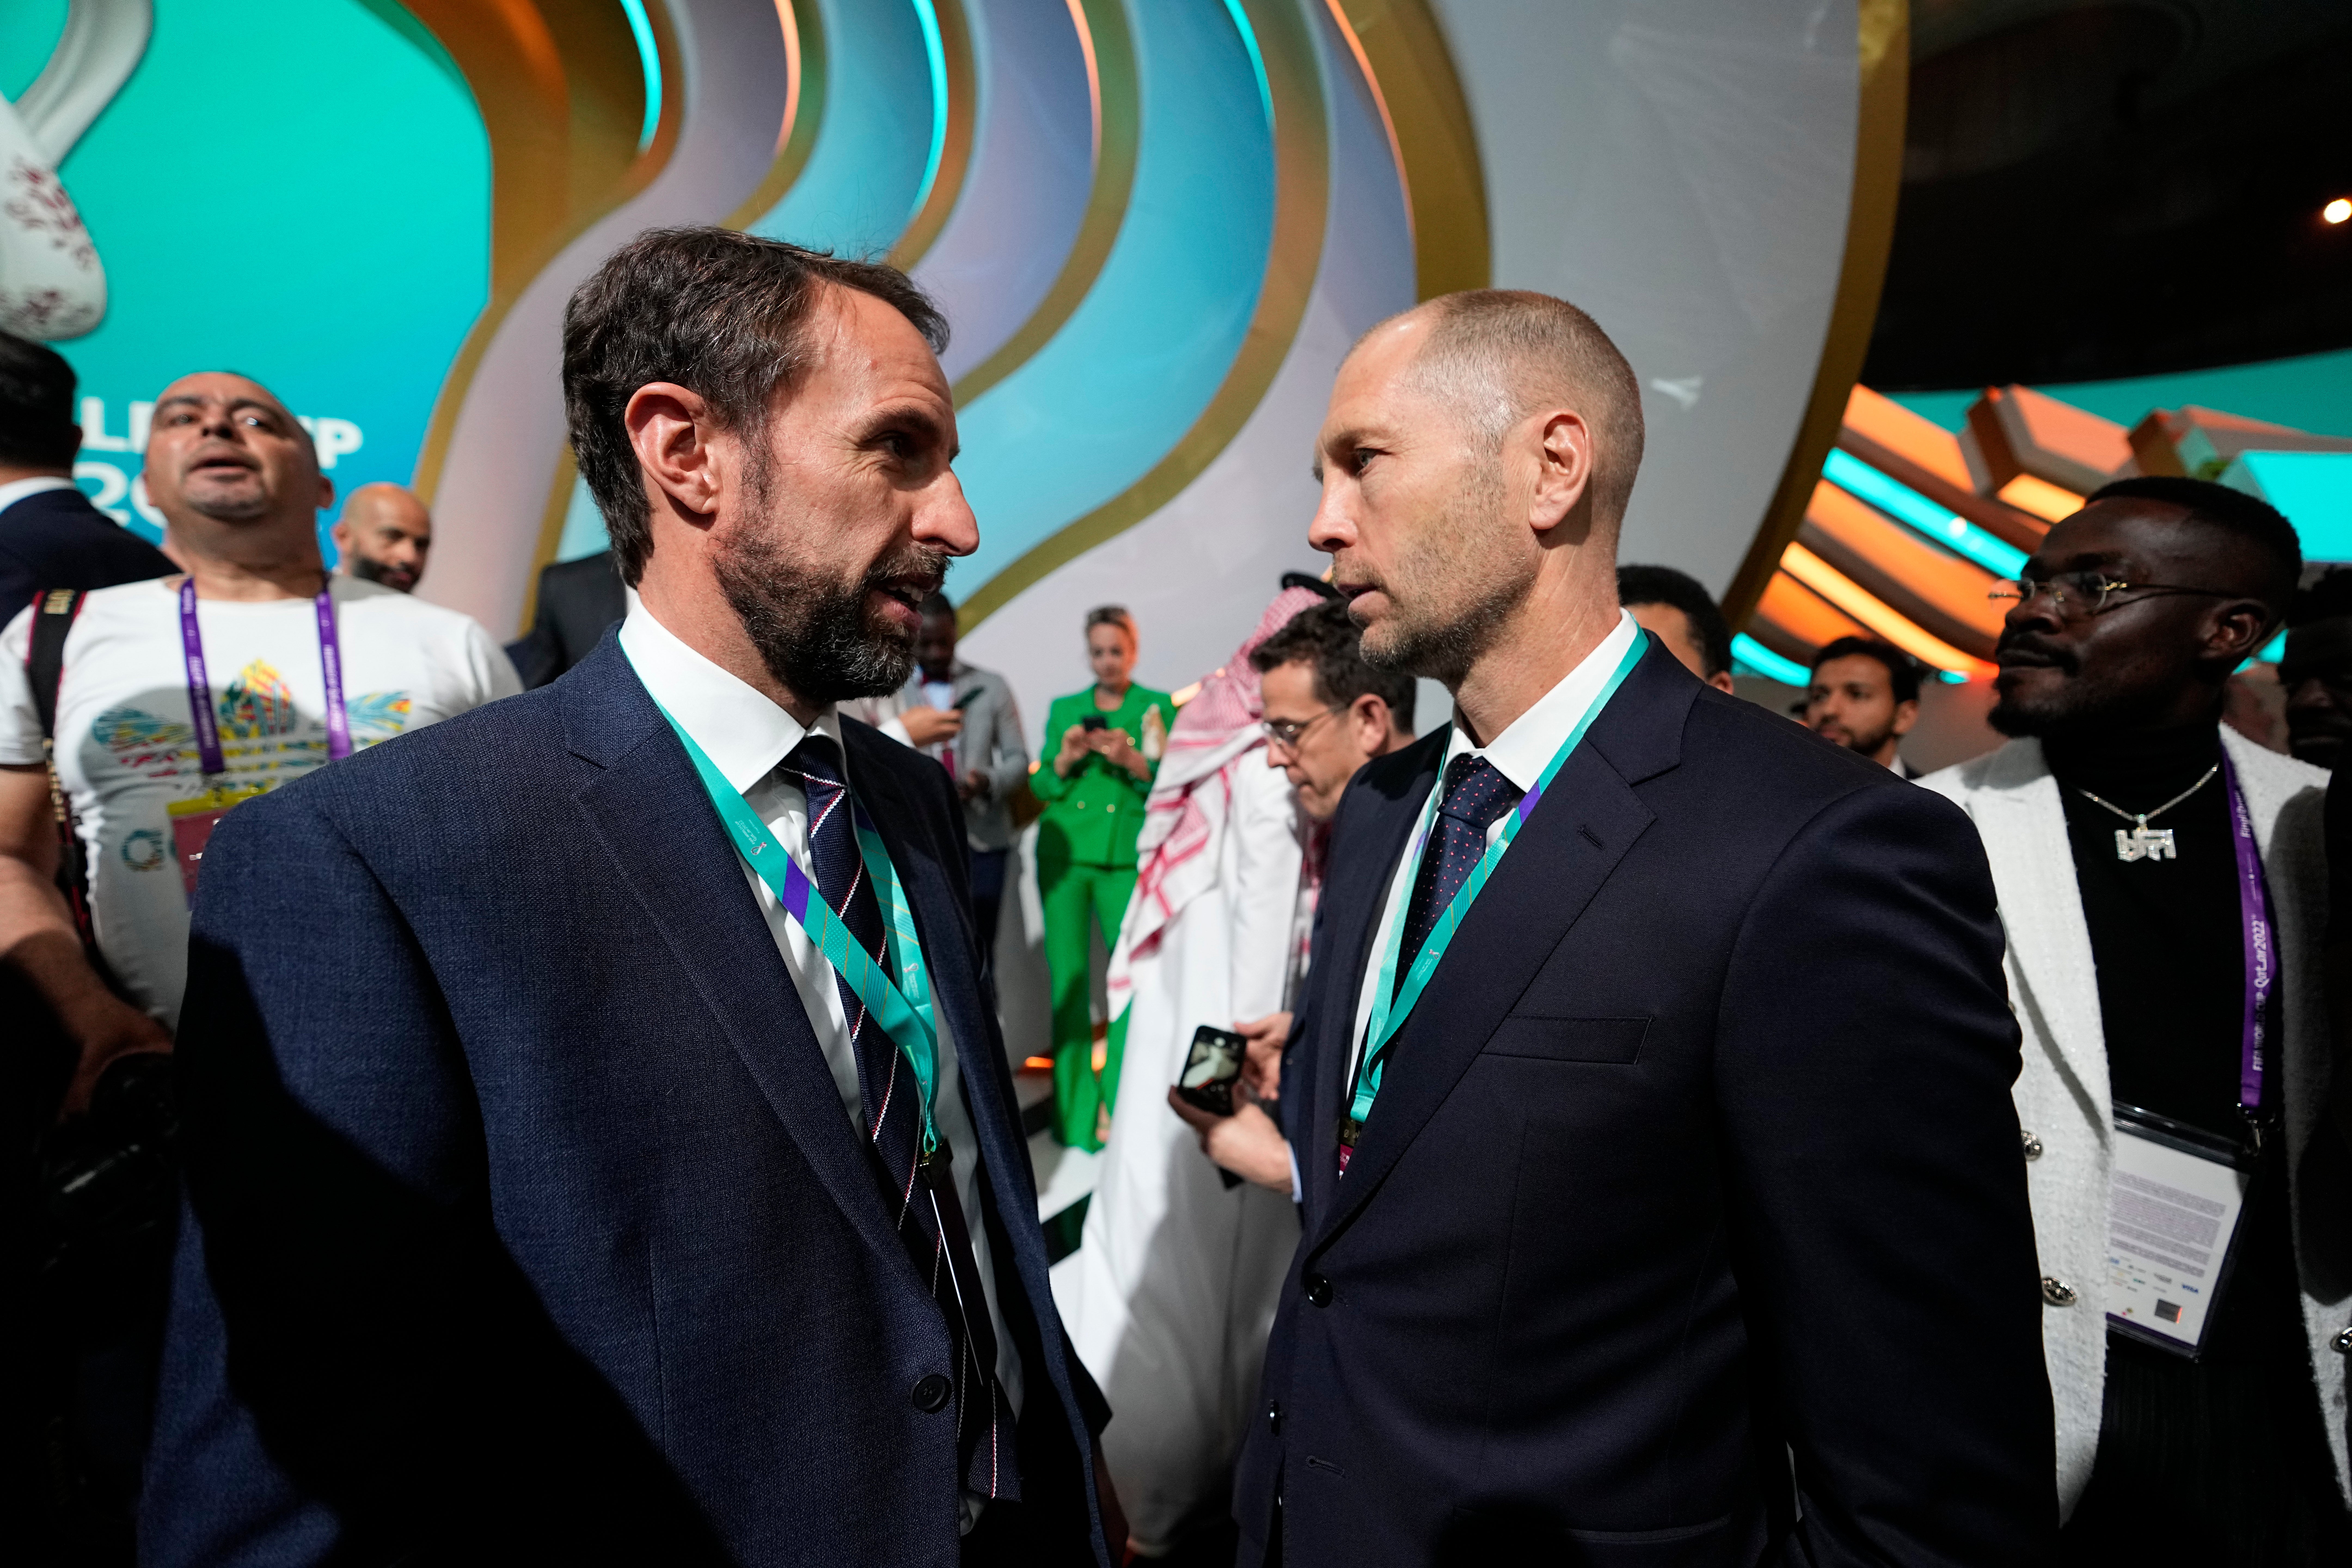 Gareth Southgate and Gregg Berhalter have developed a relationship since the latter became USA coach